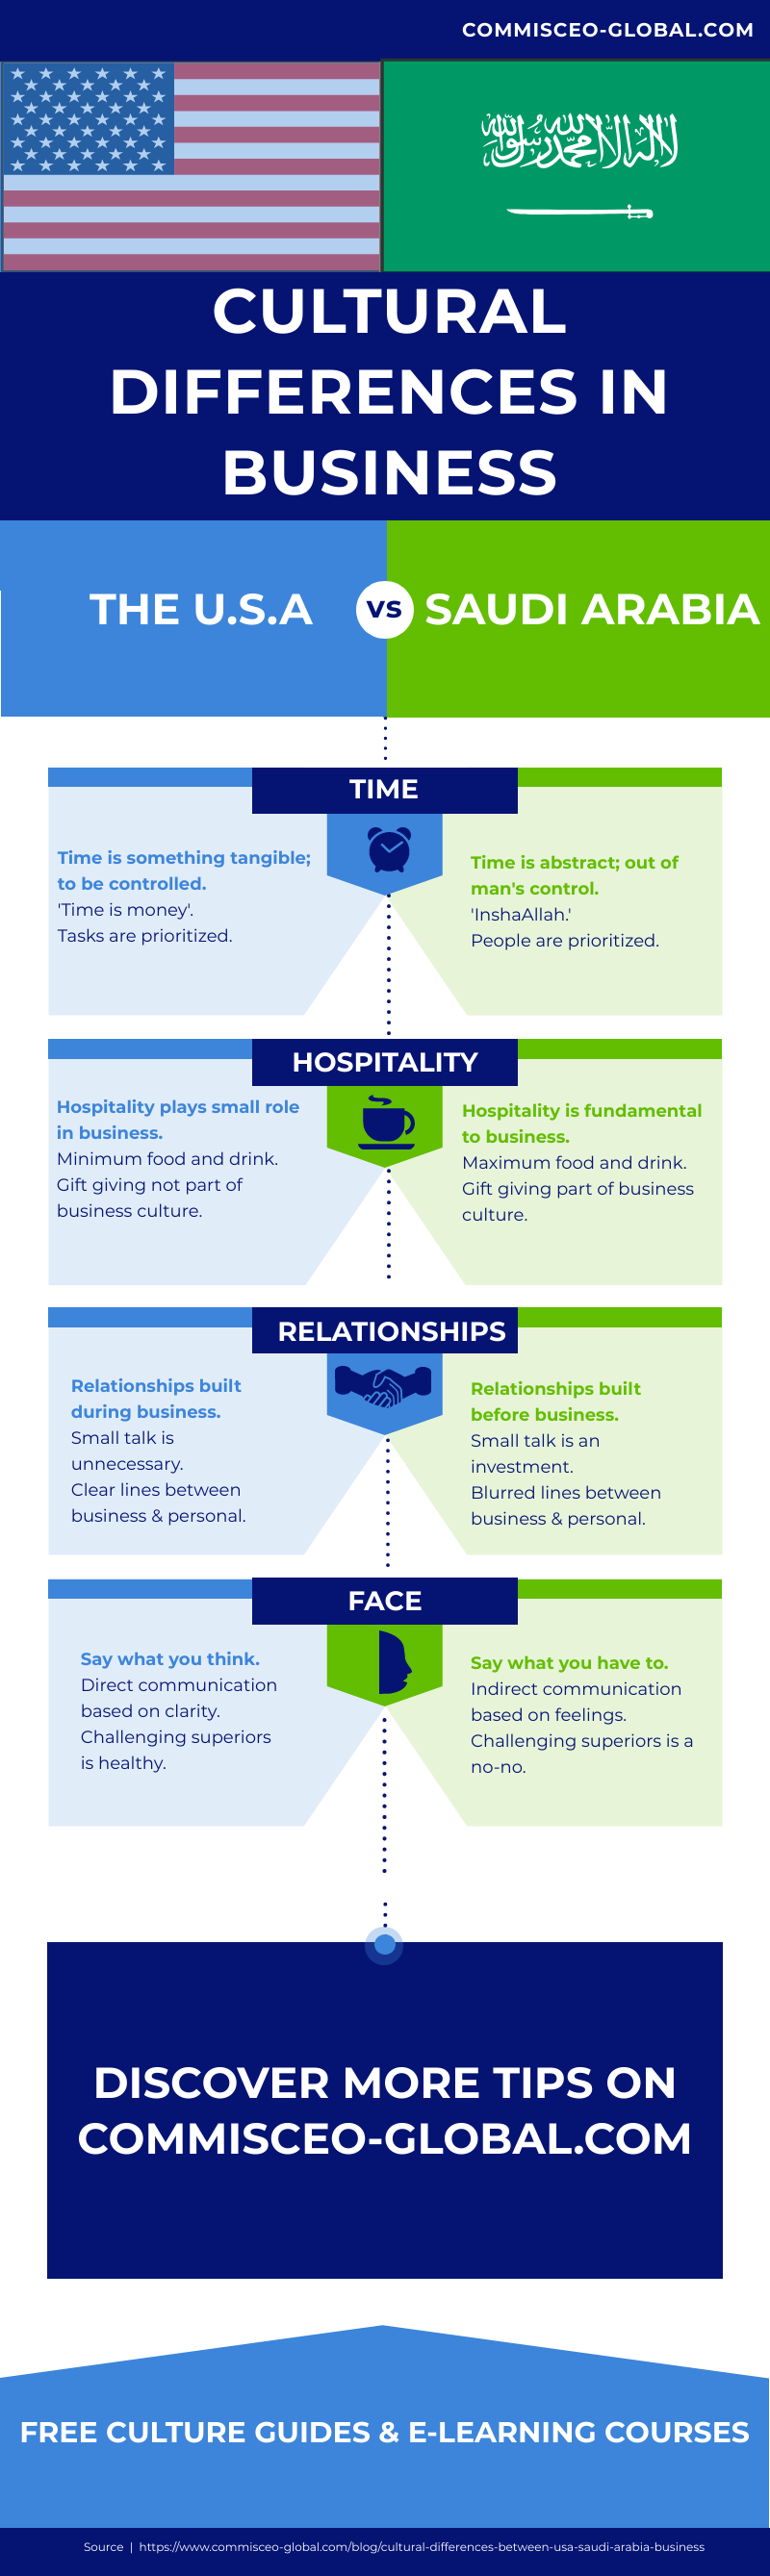 Infographic on Cultural Differences Between USA and Saudi Arabia in Business